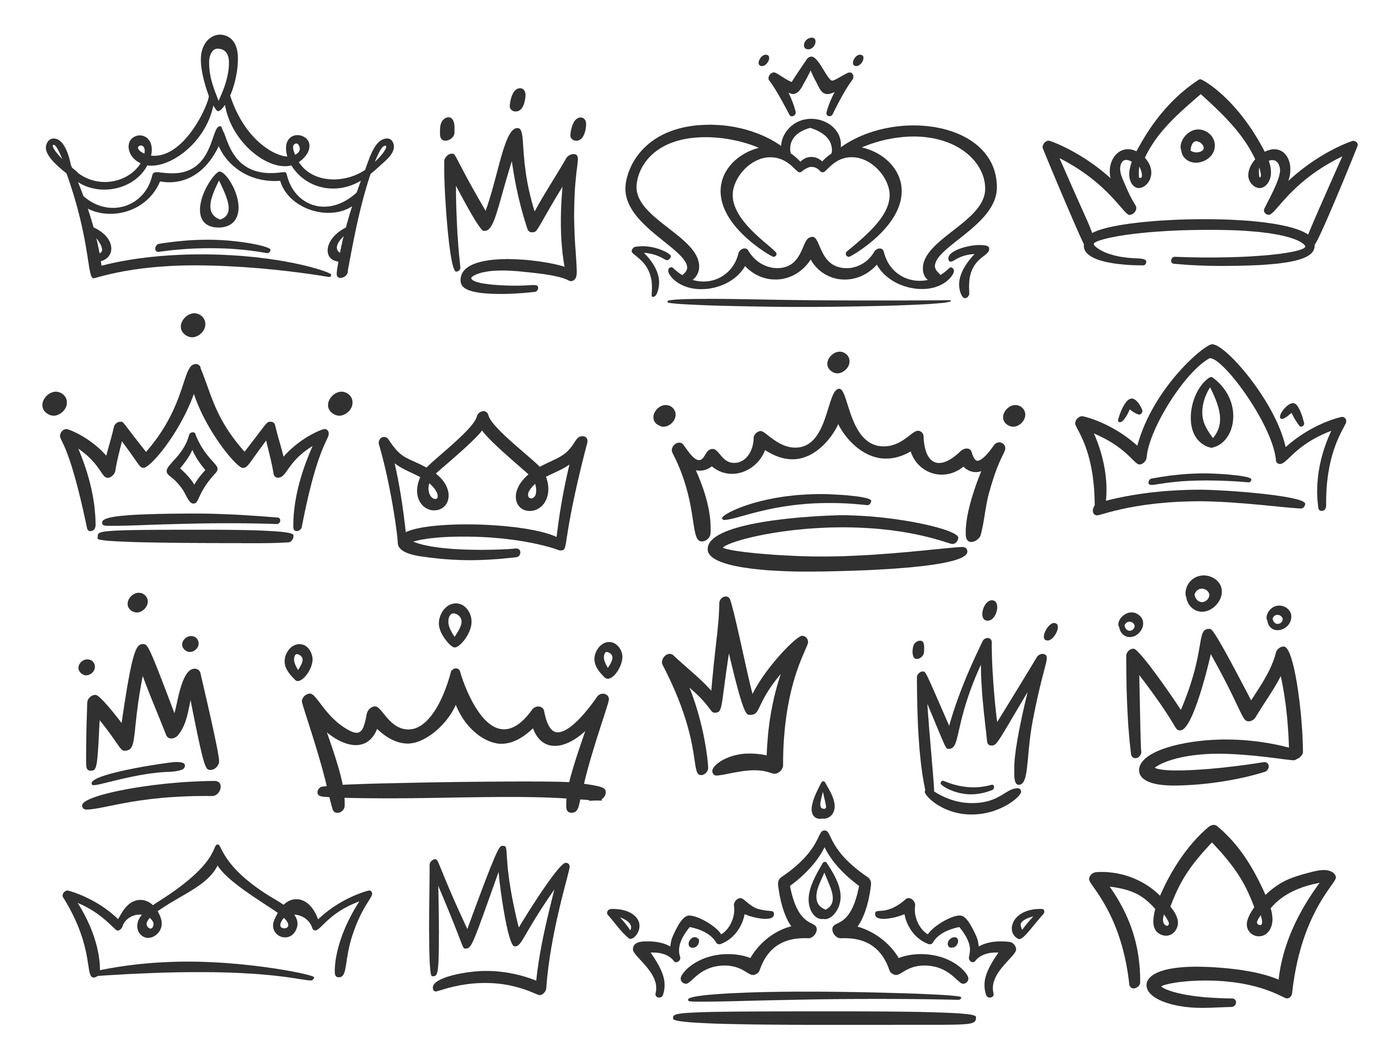 Sketch Crown Simple Graffiti Crowning Elegant Queen Or King Crowns H By Tartila Thehungryjpeg Com